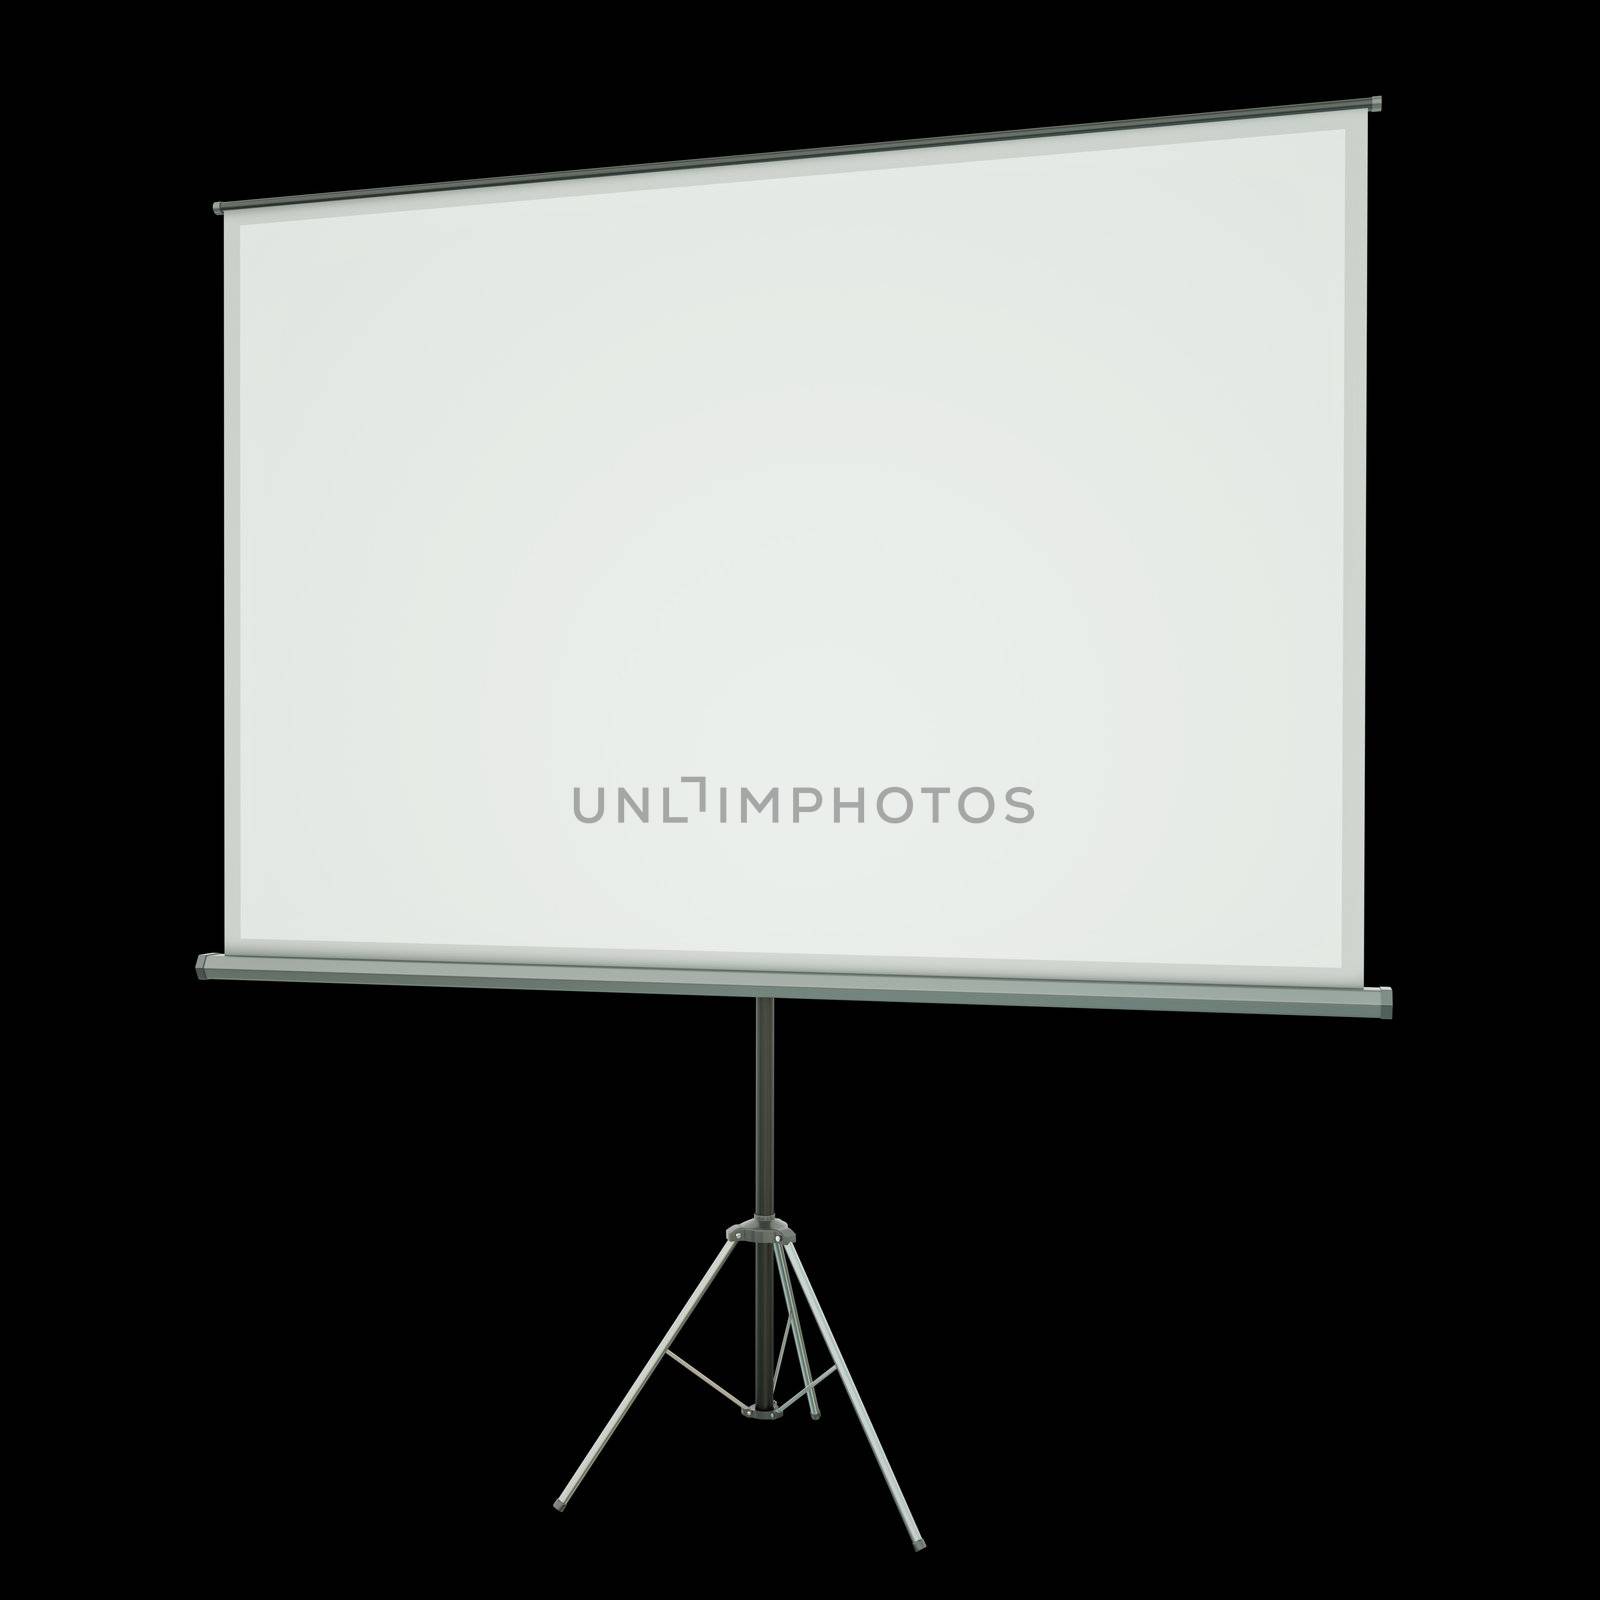 Blank projection screen over black background. 3D rendered image